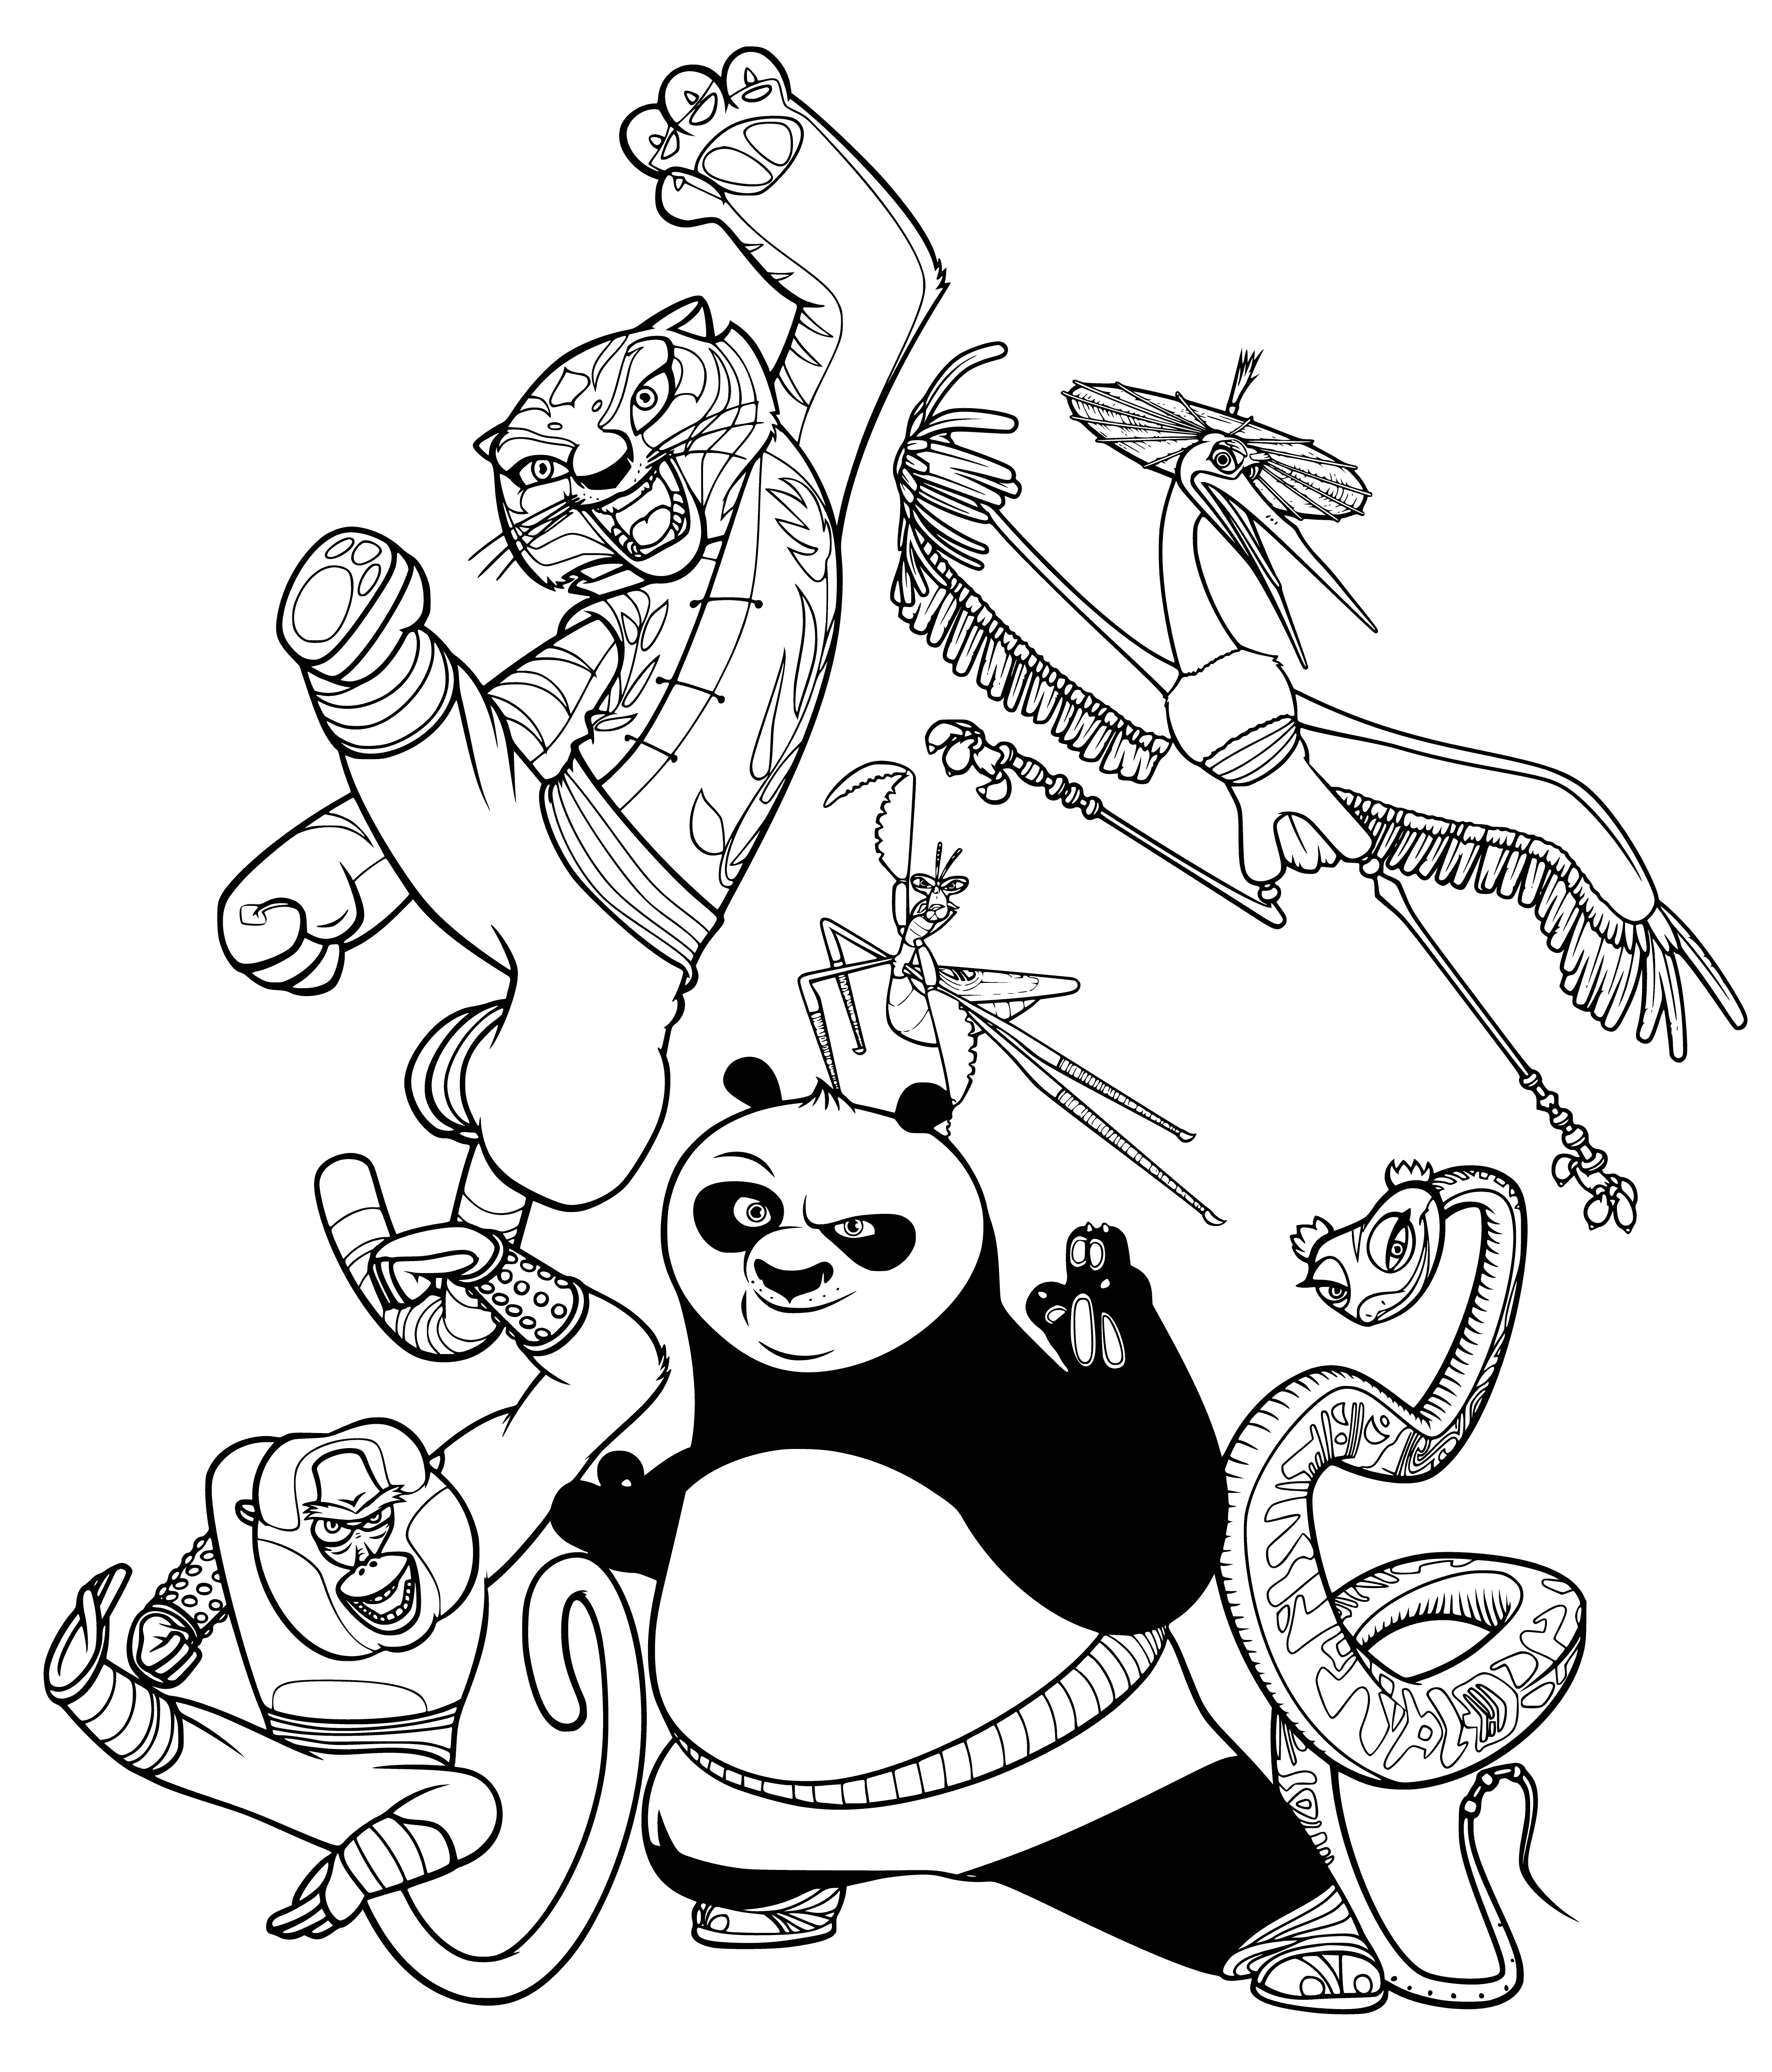 Five and Po coloring page